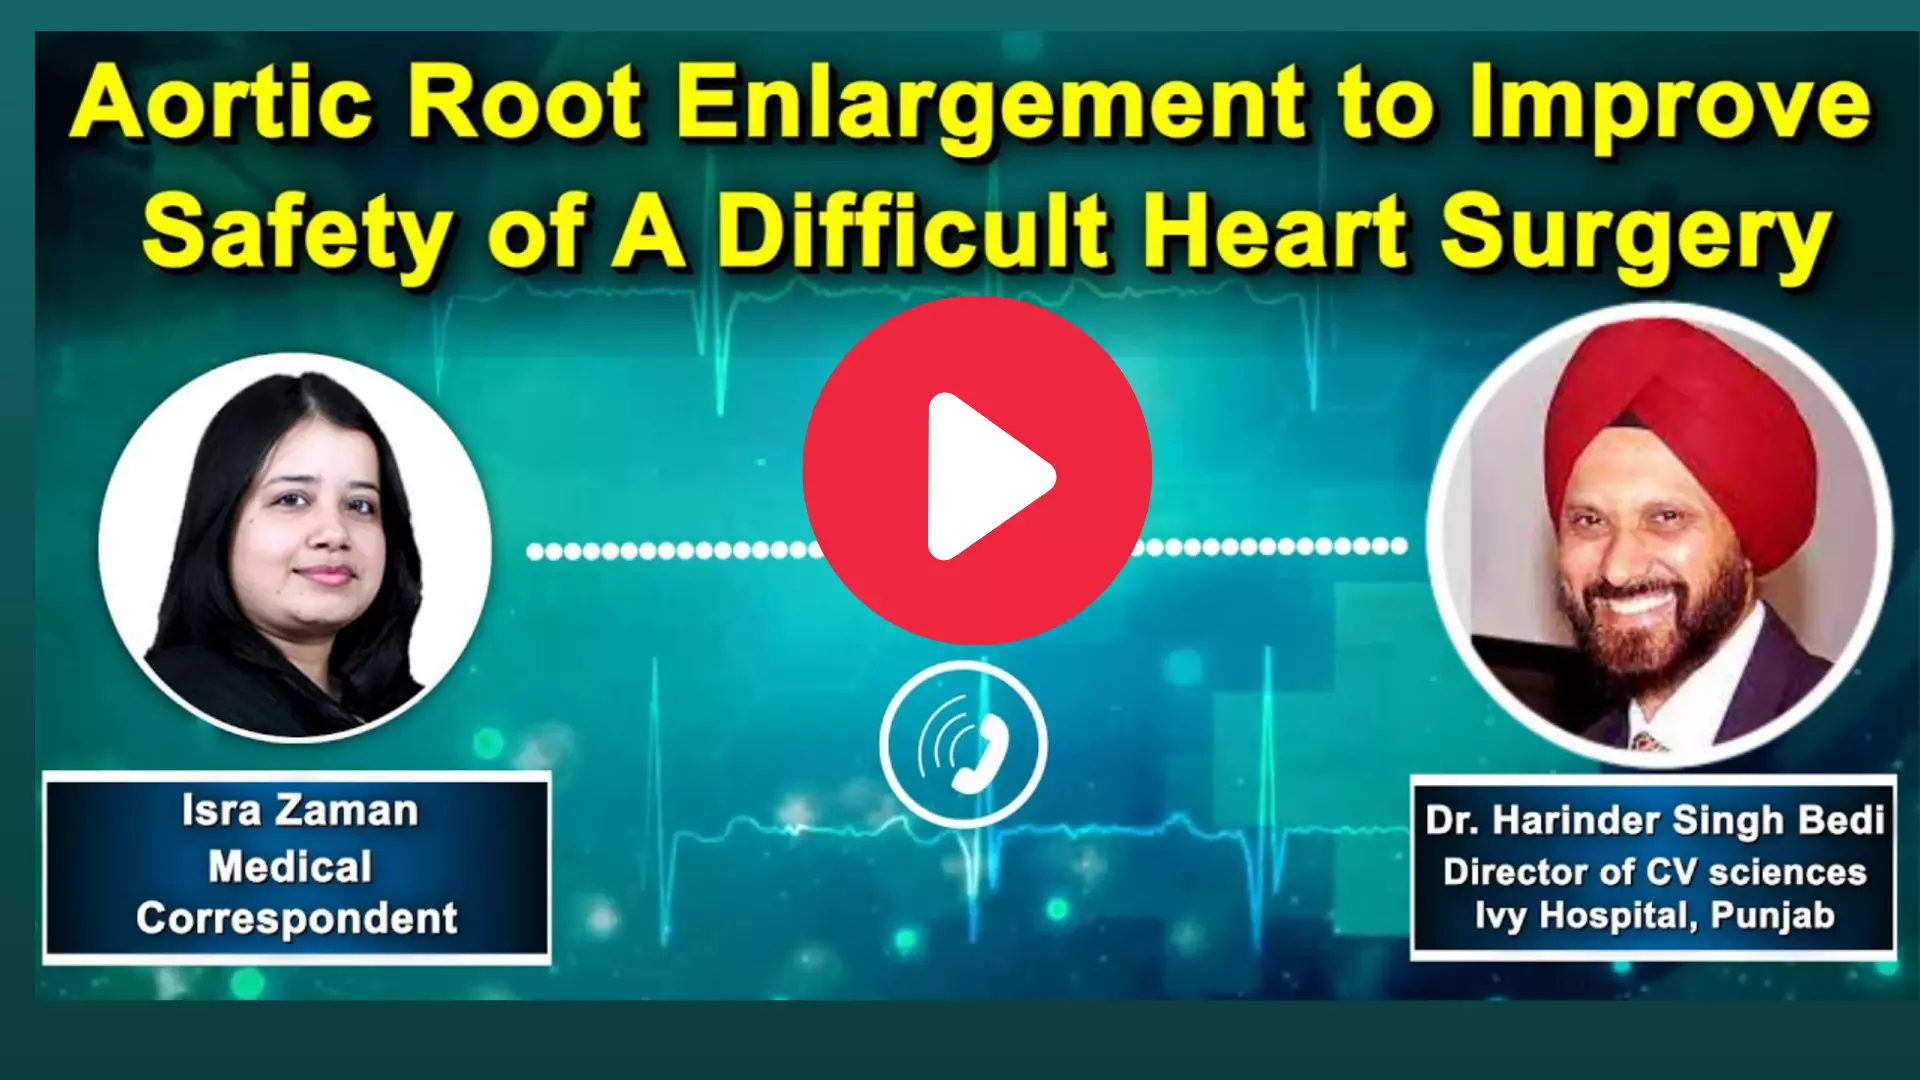 Dr. Harinder Singh Bedis interview about his latest Aortic Root Enlargement Technique